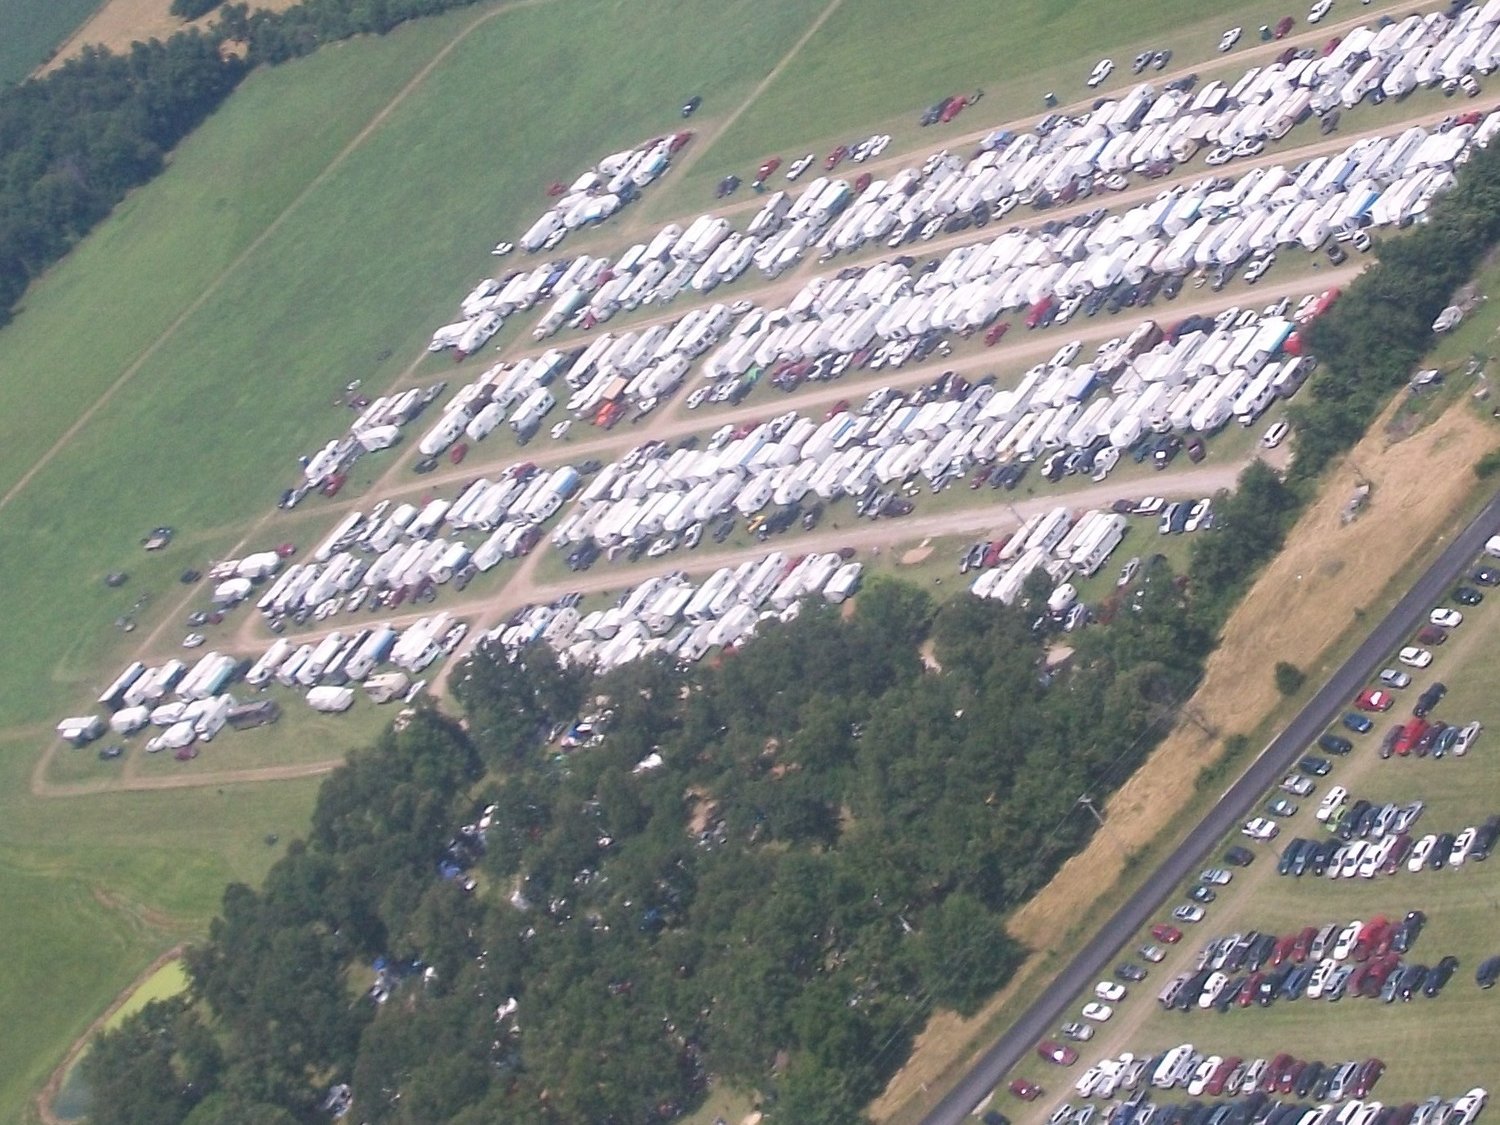 The campgrounds at Starvy Creek have been home to over 400 campers at previous festivals. The Day family expects to reach the hundreds for this festival, but have 30 acres of space to accommodate the crowd.